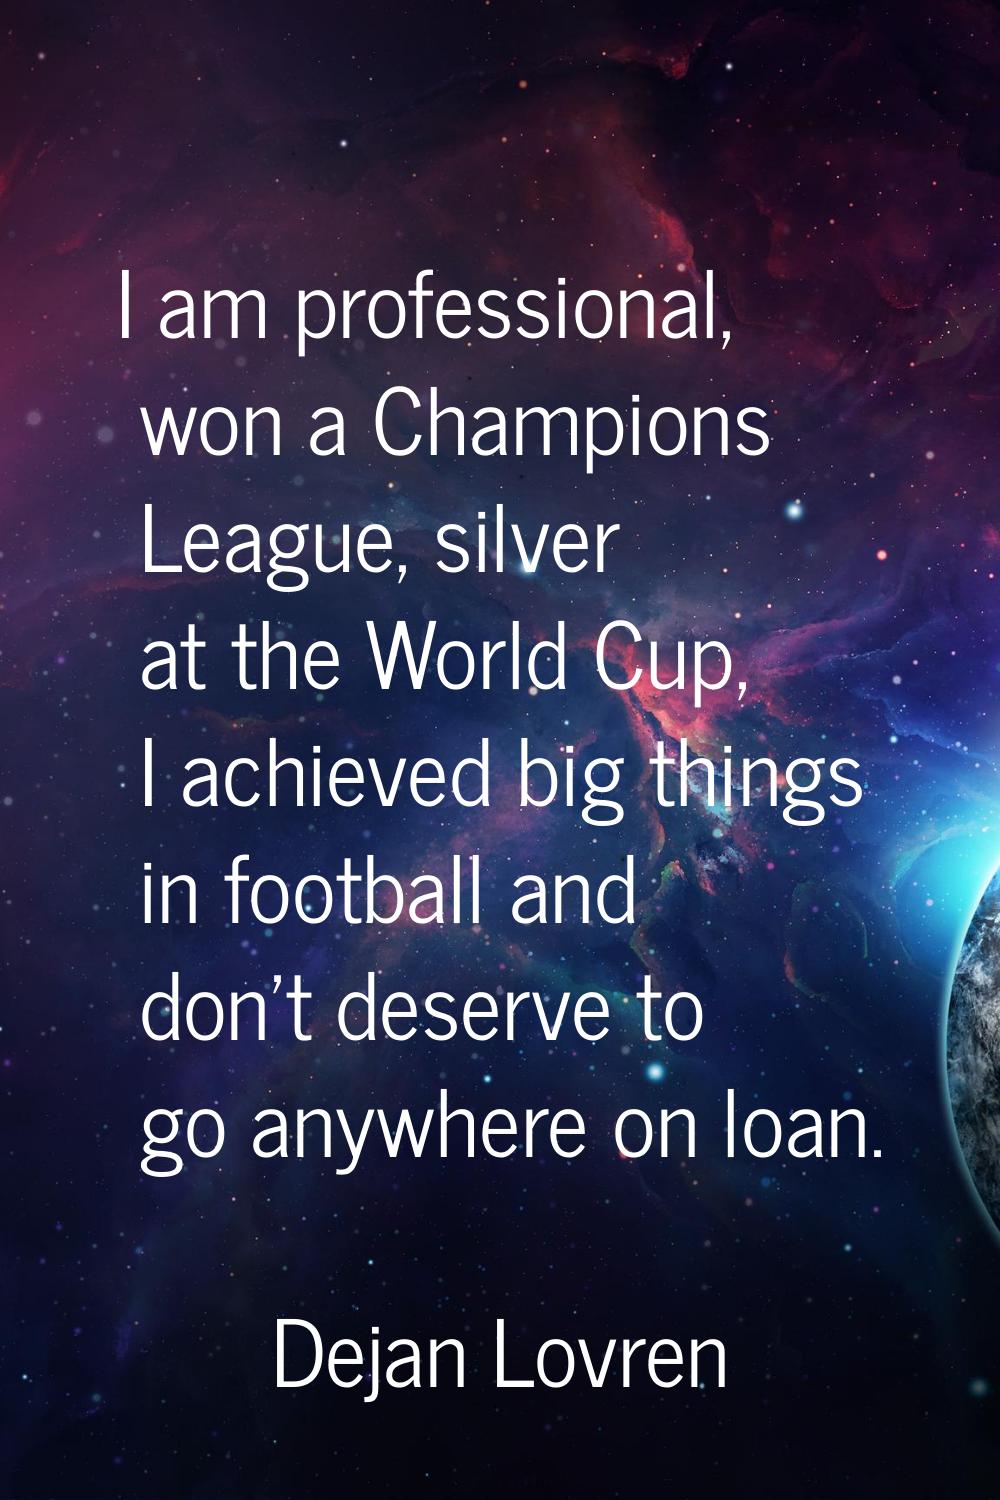 I am professional, won a Champions League, silver at the World Cup, I achieved big things in footba